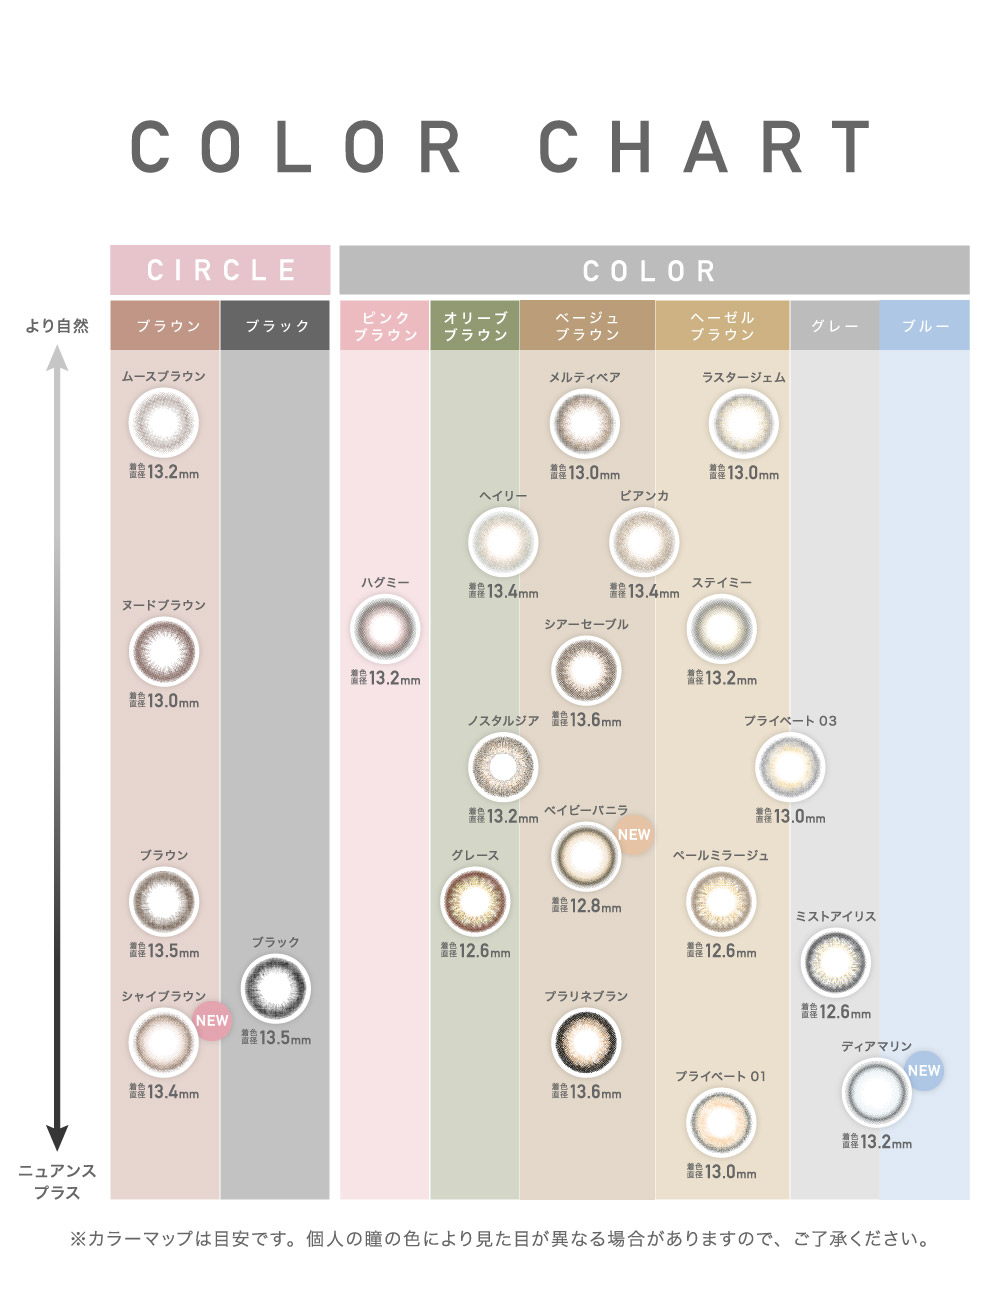 1day COLOR CHART